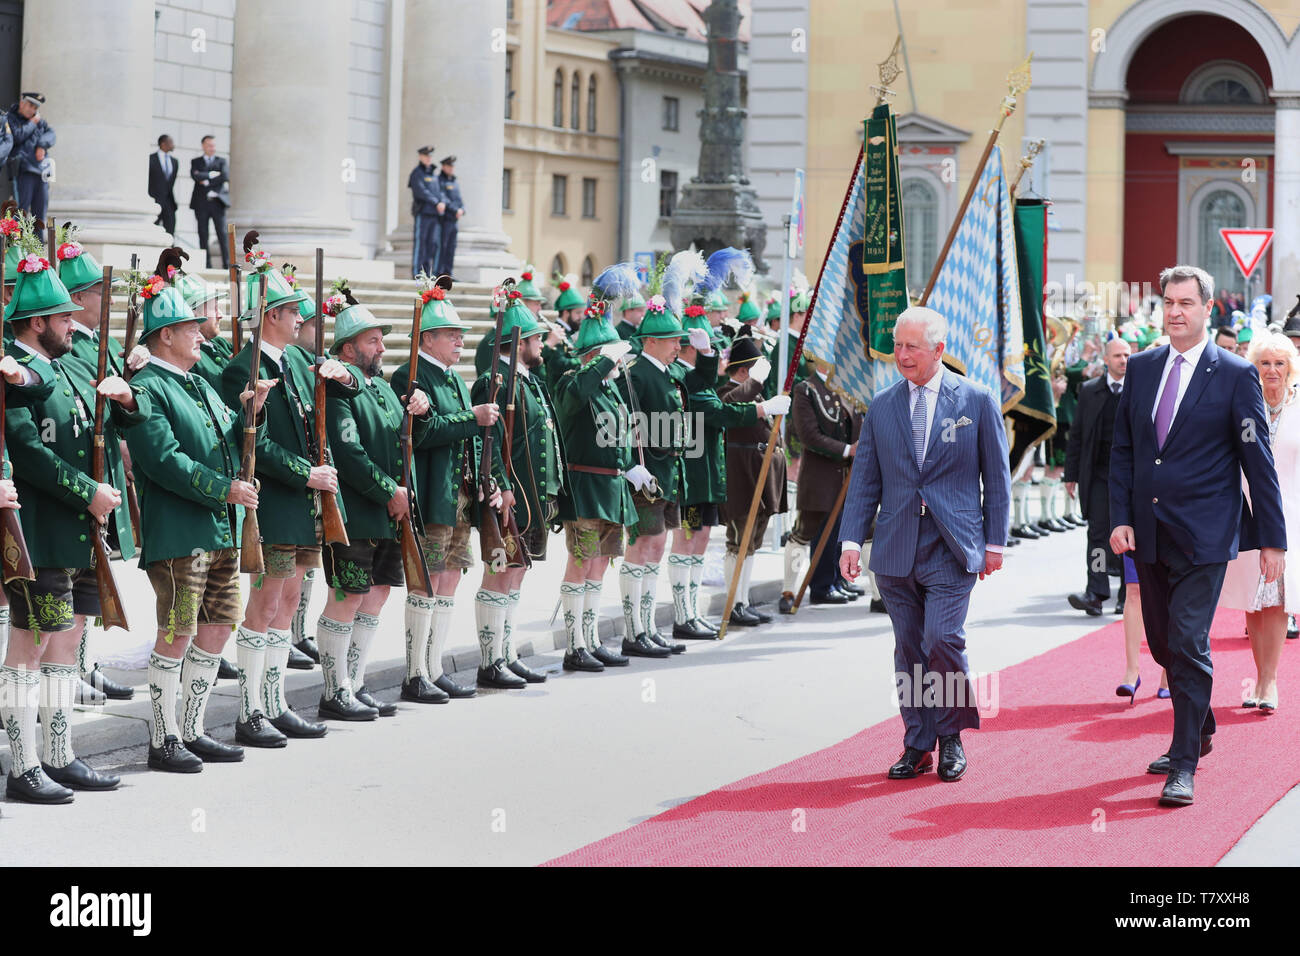 The Prince of Wales and the Duchess of Cornwall are officially welcomed to Munich, Germany, in an event hosted by the Minister-President of Bavaria Markus Soder. Stock Photo